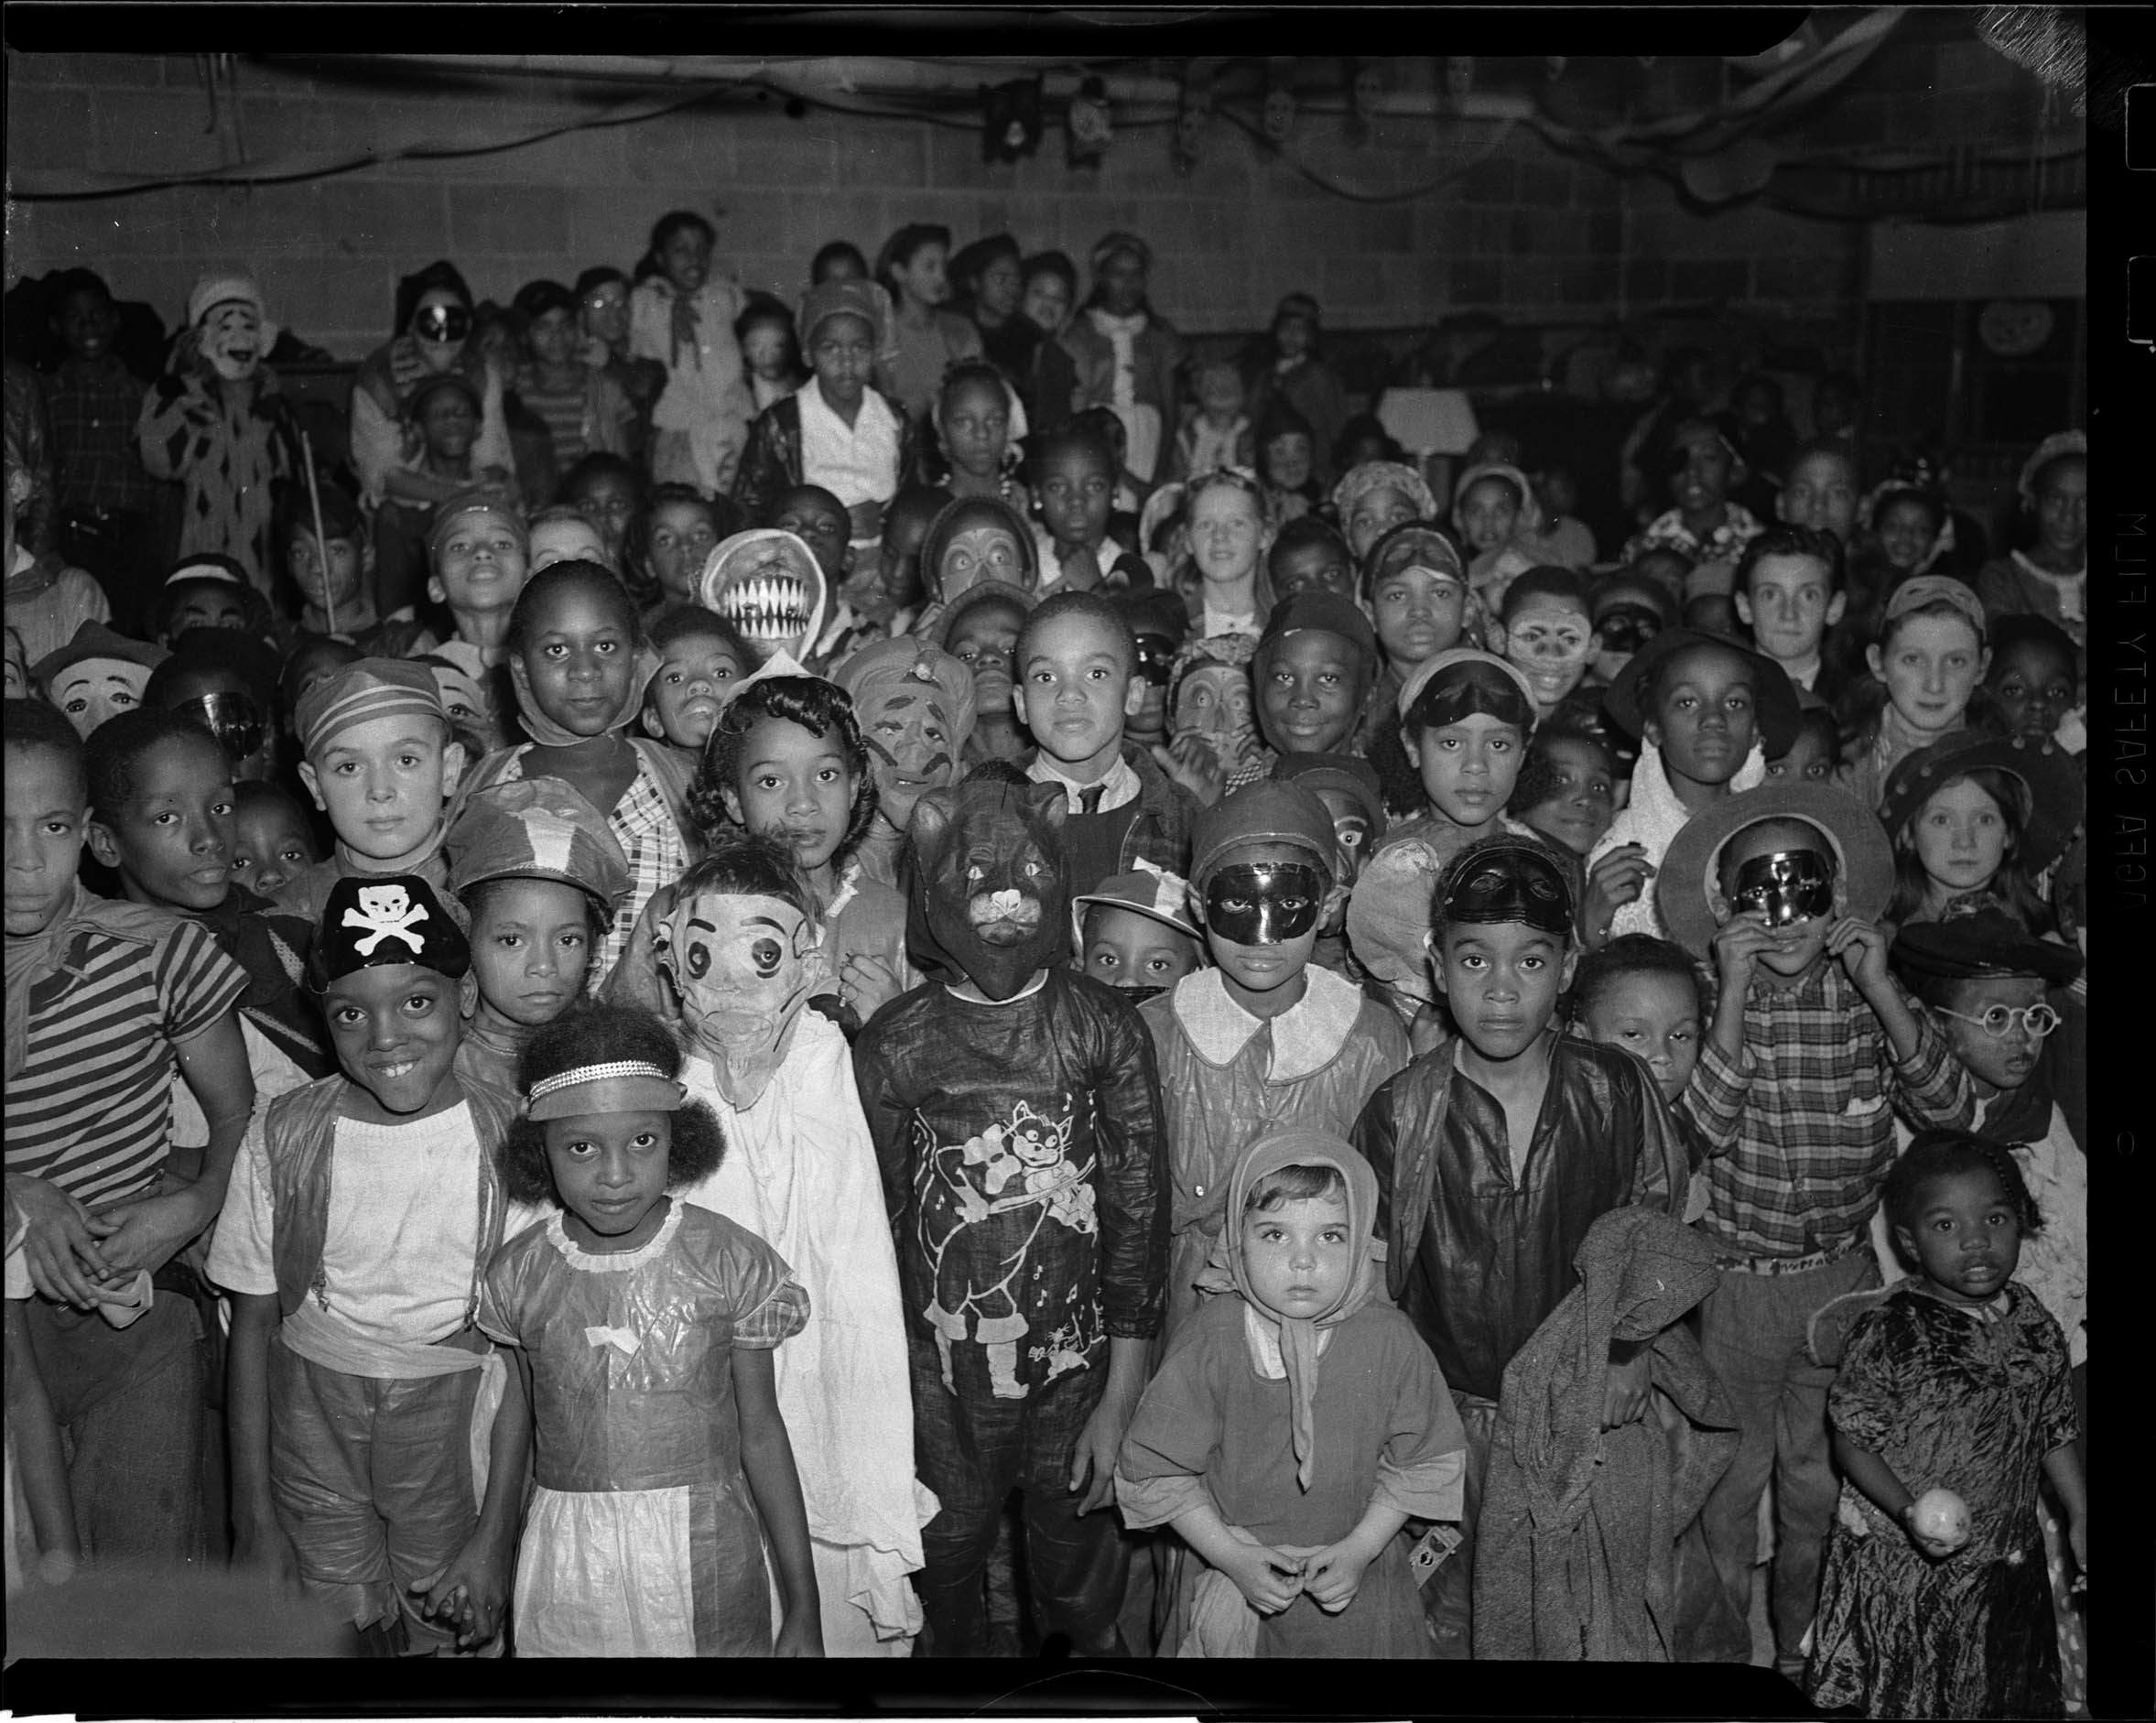 Crowd of children, all facing the camera, wearing costumes, including pirates, masked heroes, and monsters